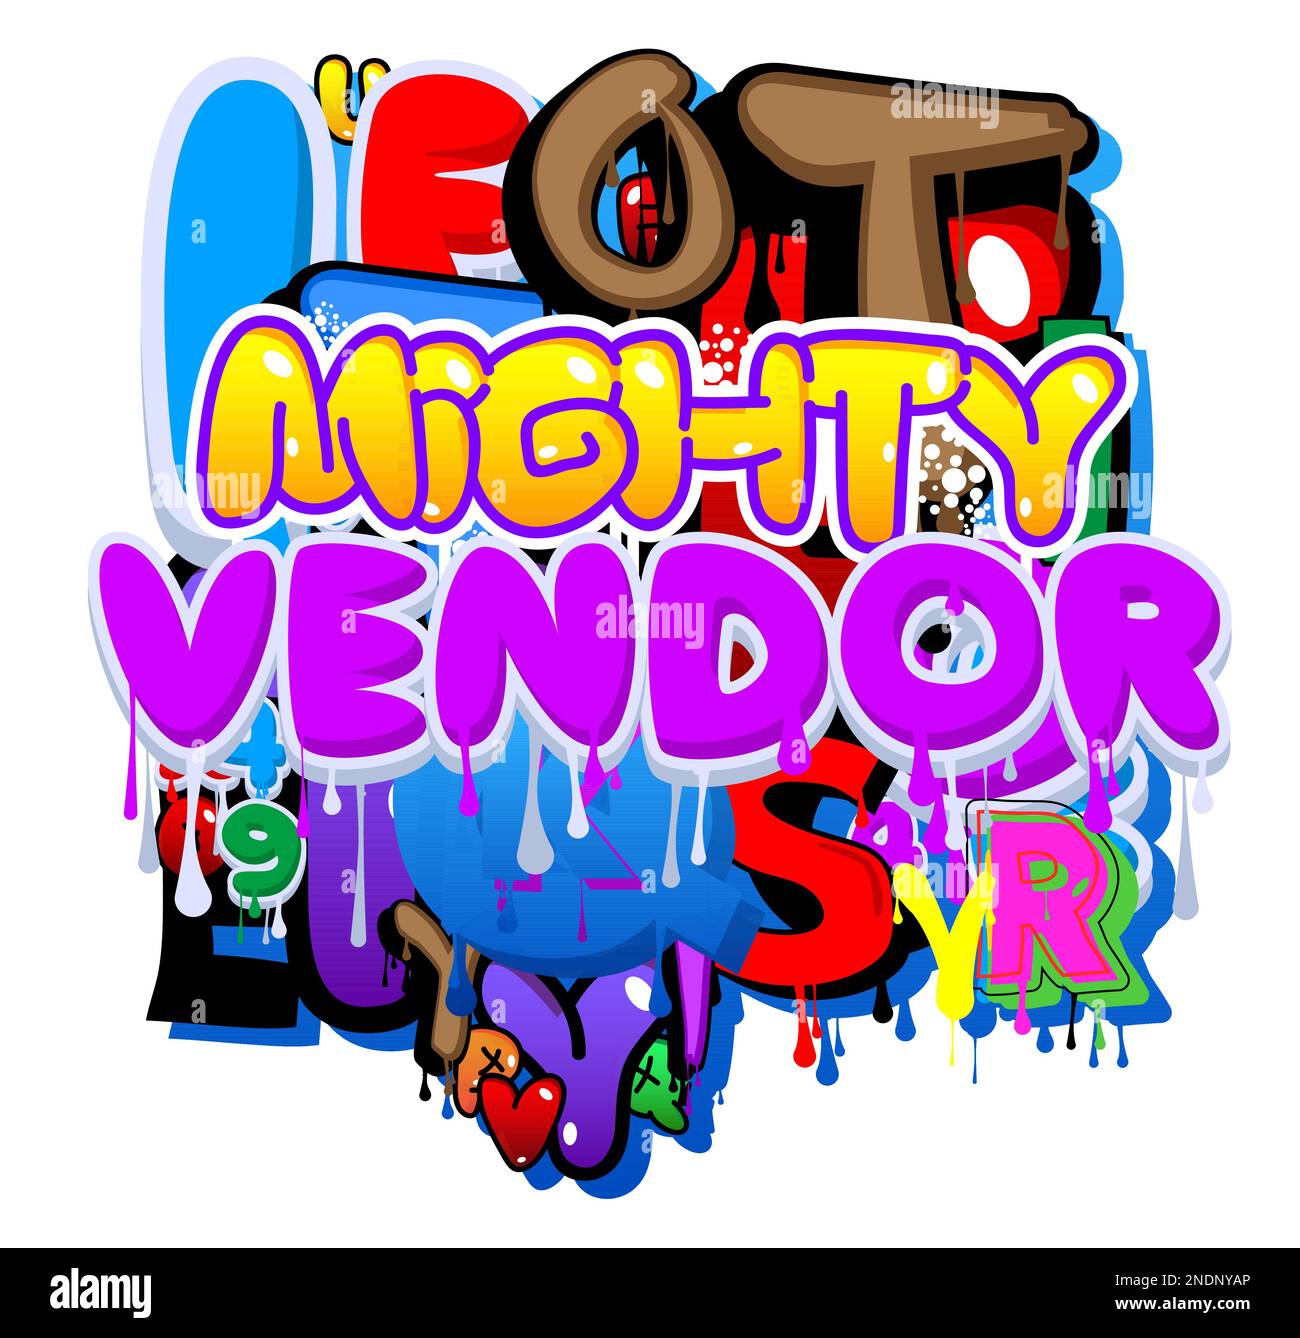 Mighty Vendor. Graffiti tag. Abstract modern street art decoration performed in urban painting style. Stock Vector